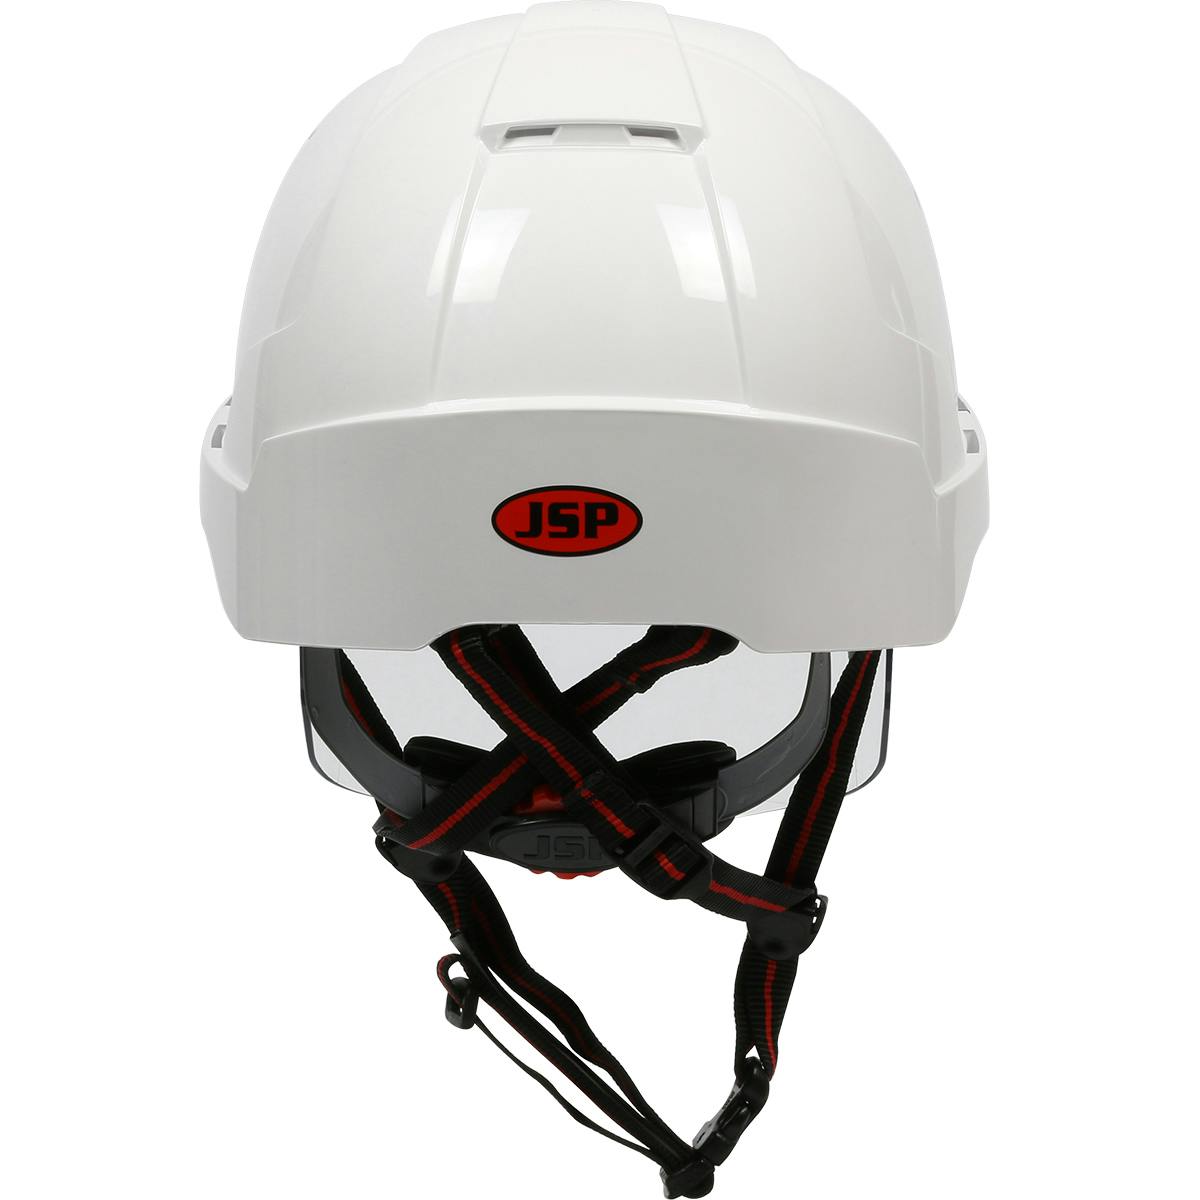 Type I, Non-vented Industrial Safety Helmet with fully adjustable four point chinstrap, Lightweight ABS Shell, Integrated Faceshield, 6-Point Polyester Suspension and Wheel Ratchet Adjustment, White-Smoke (280-EVSN-CH) - OS_0